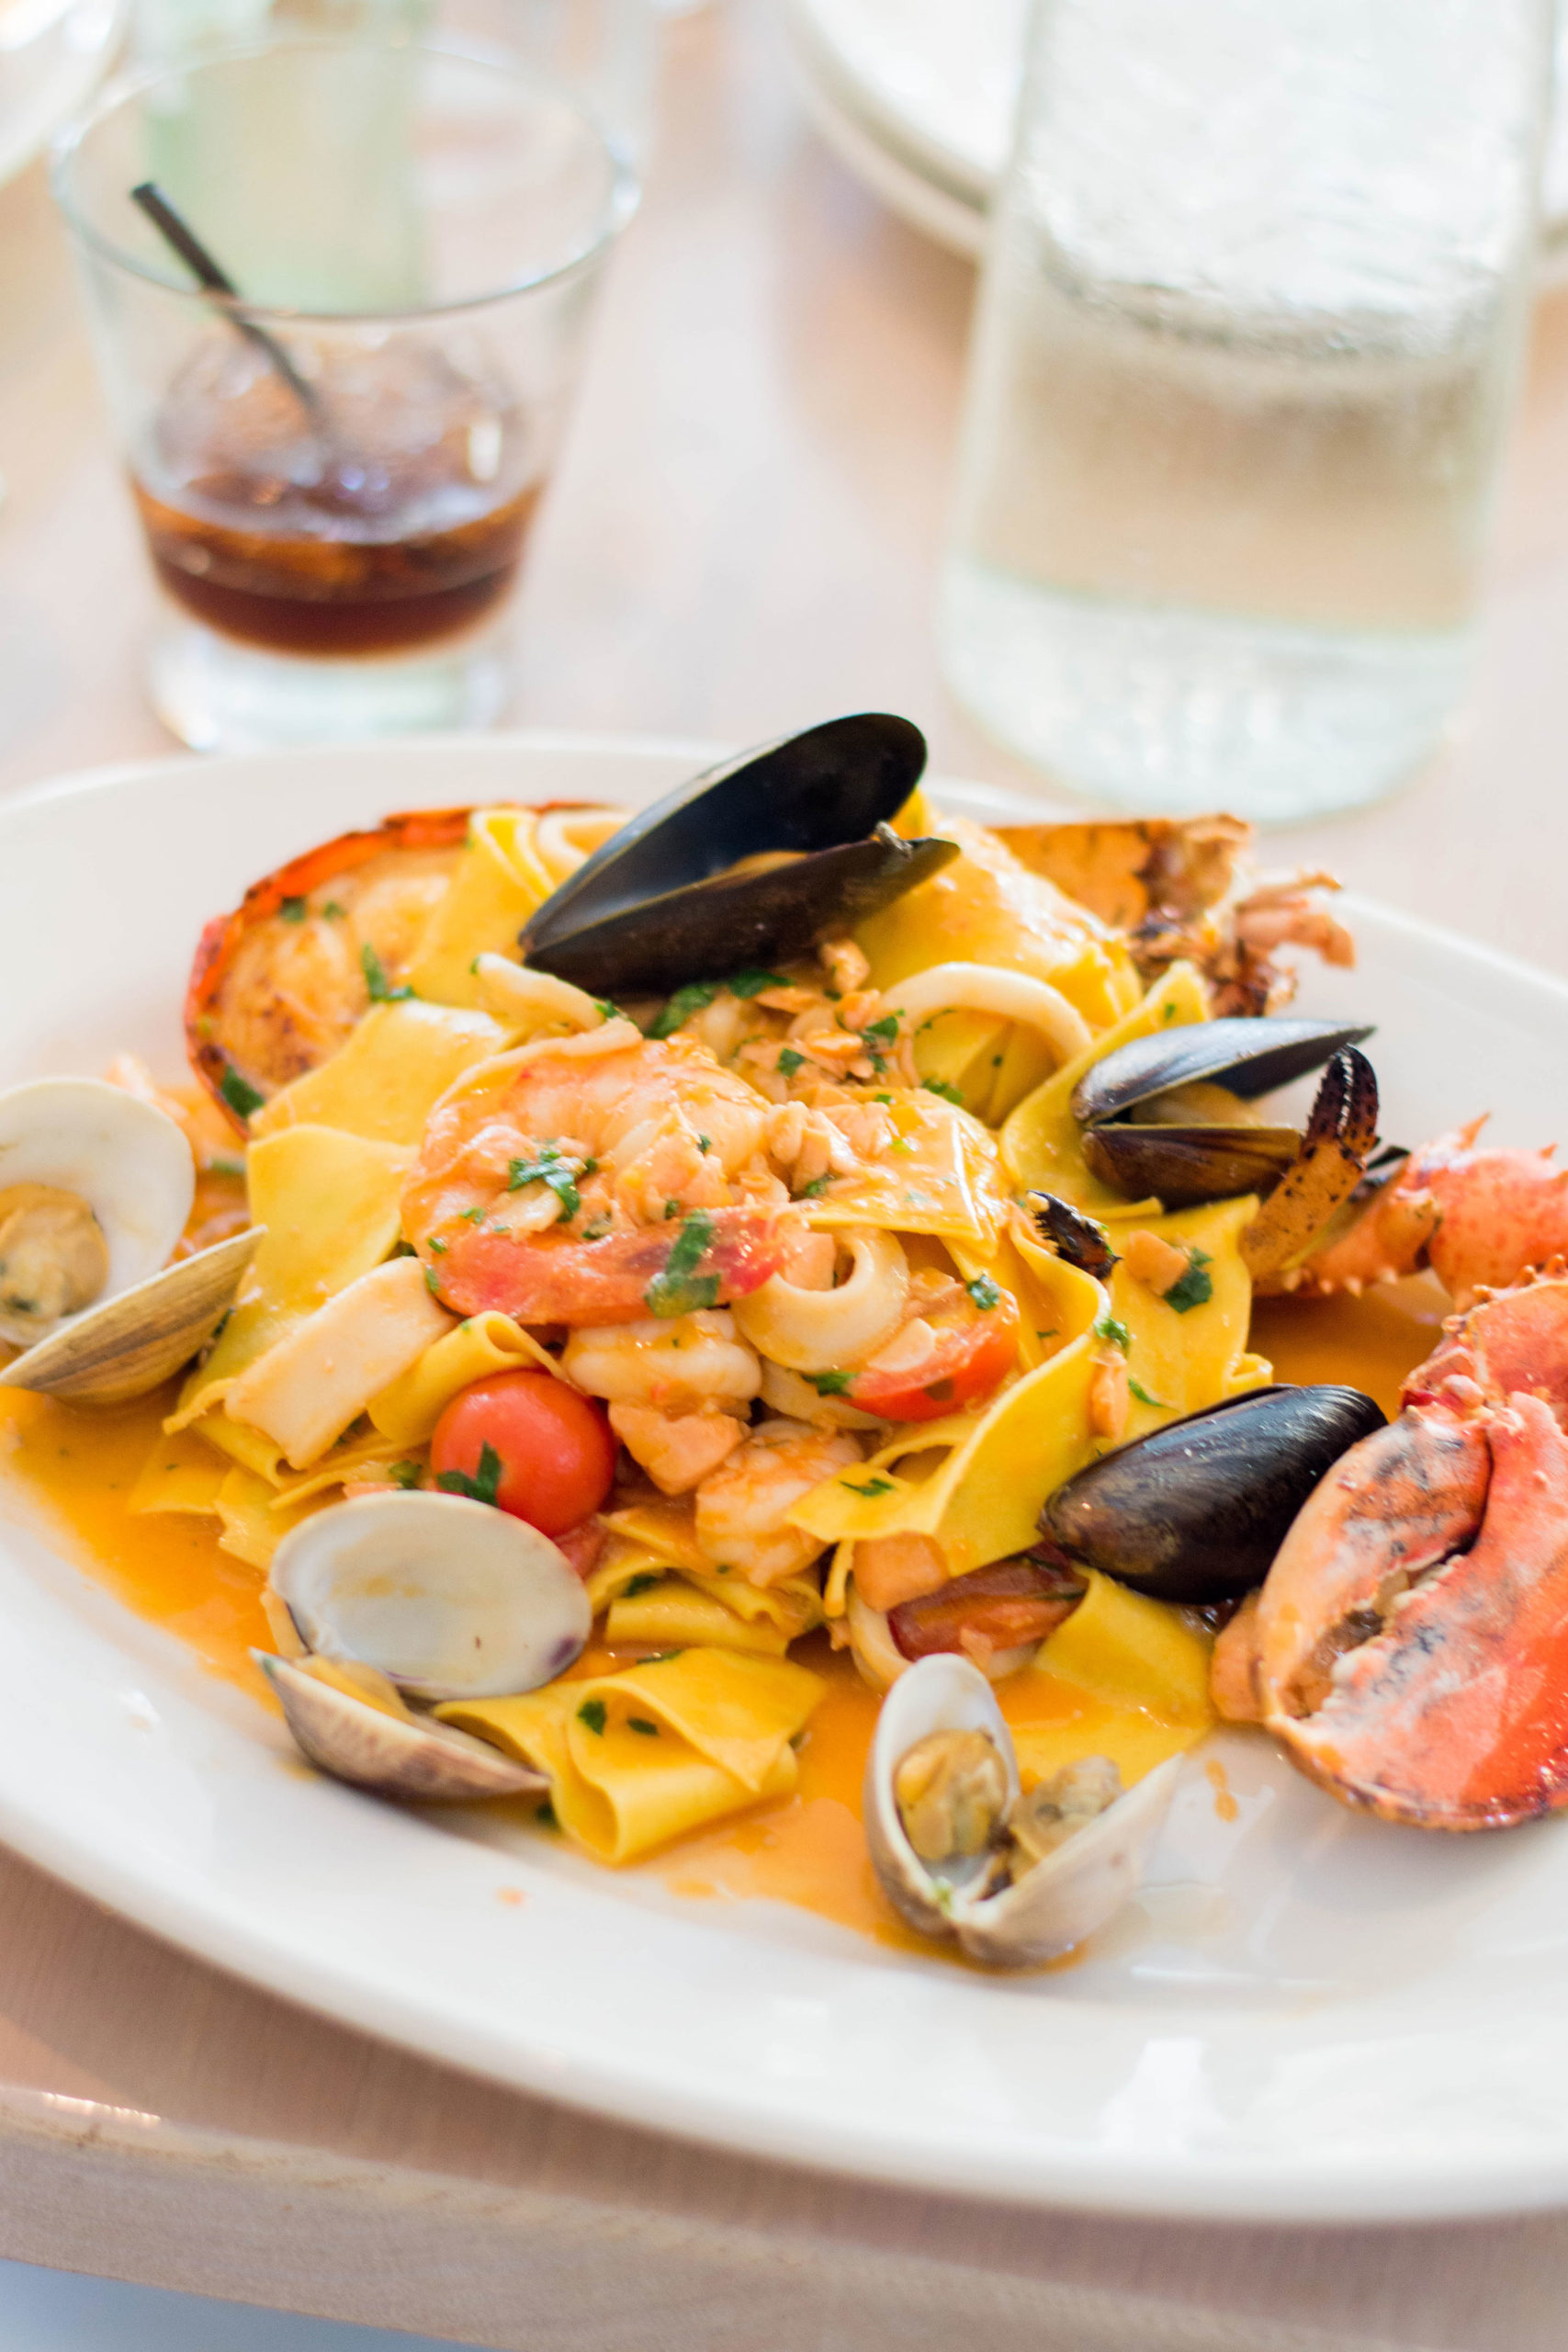 You can find Caffe Milano on 5th Avenue in Naples, Florida - a street that's bursting at the seams with great shopping and super impressive restaurants. Caffe Milano offers a diverse Italian menu that'll get your taste buds going - every. single. time. #naplesflorida